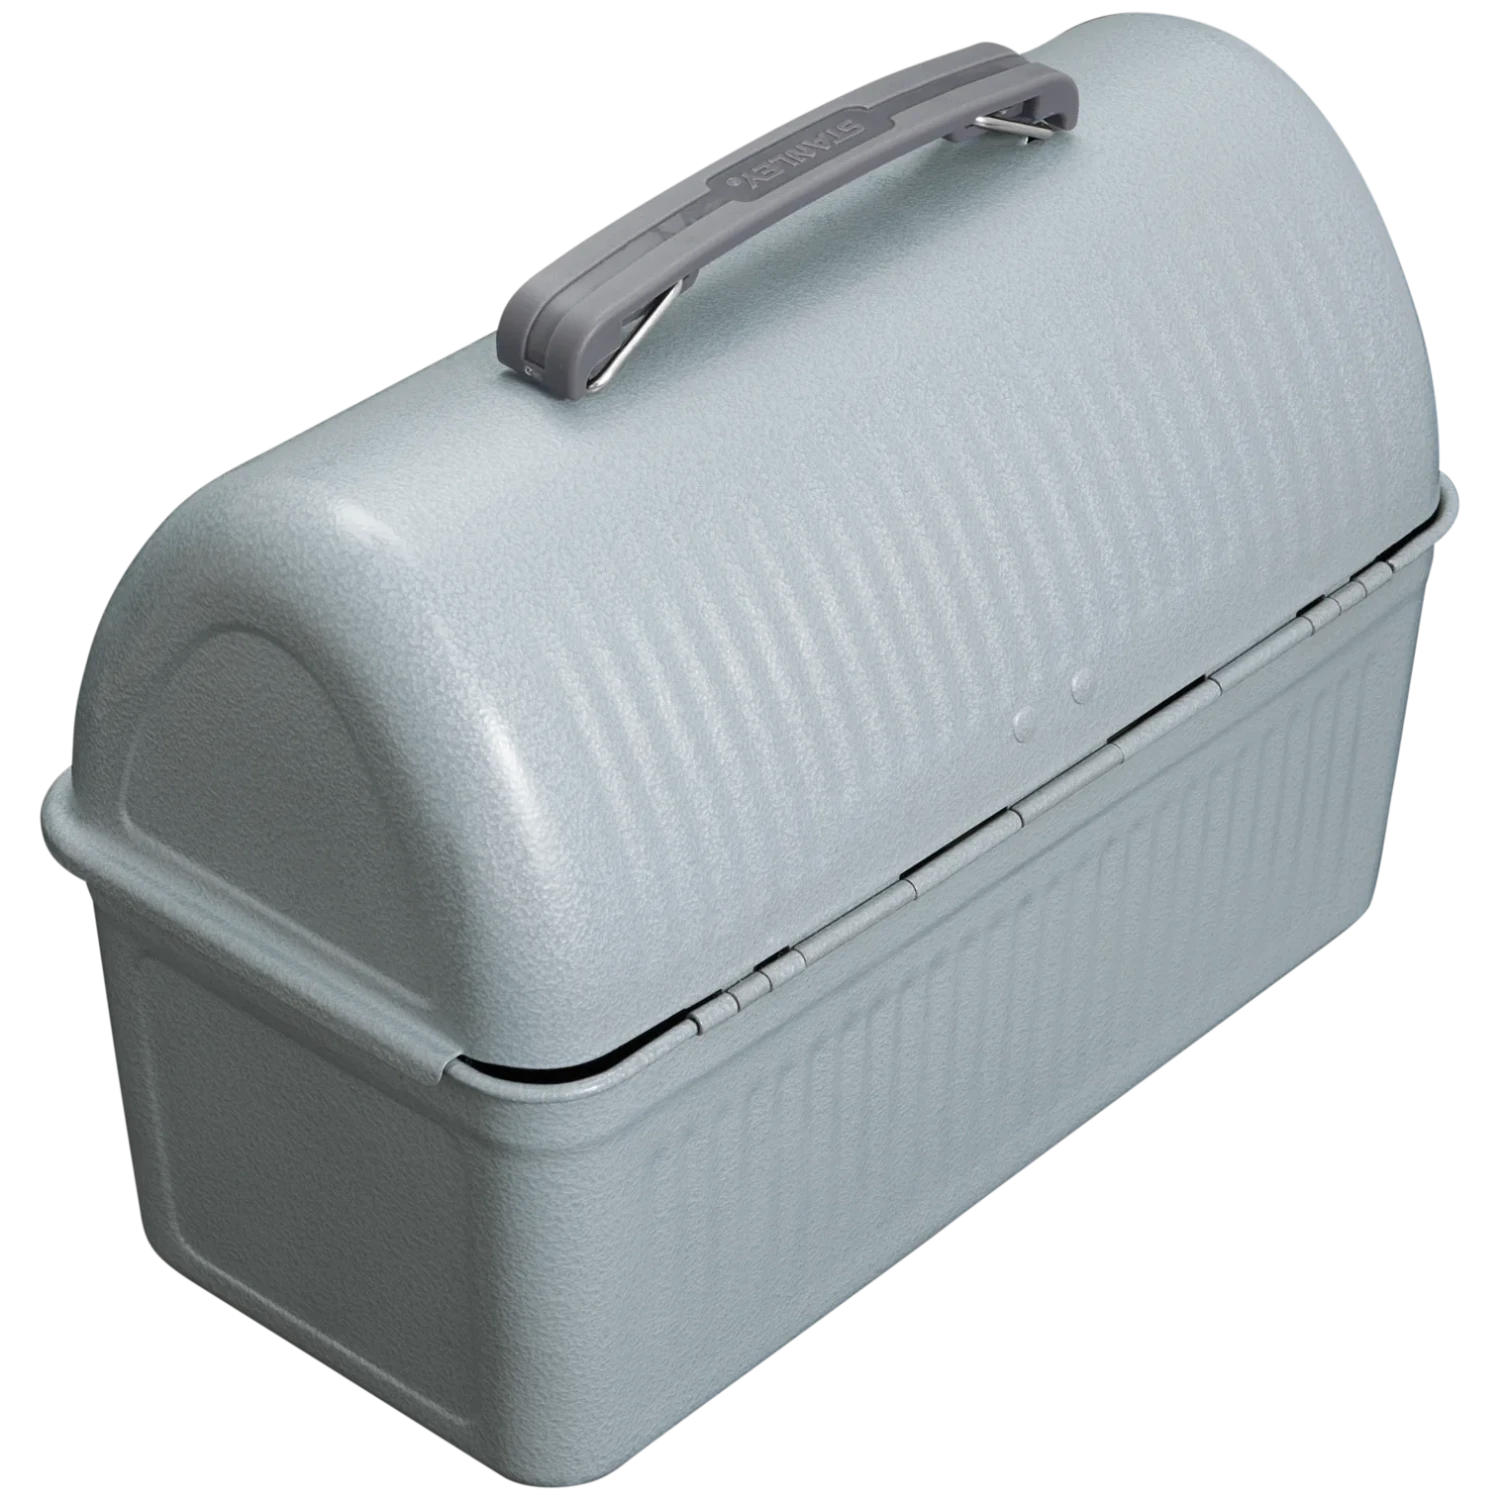 Stanley Classic Lunch Box 10 QT in hammertone silver back view